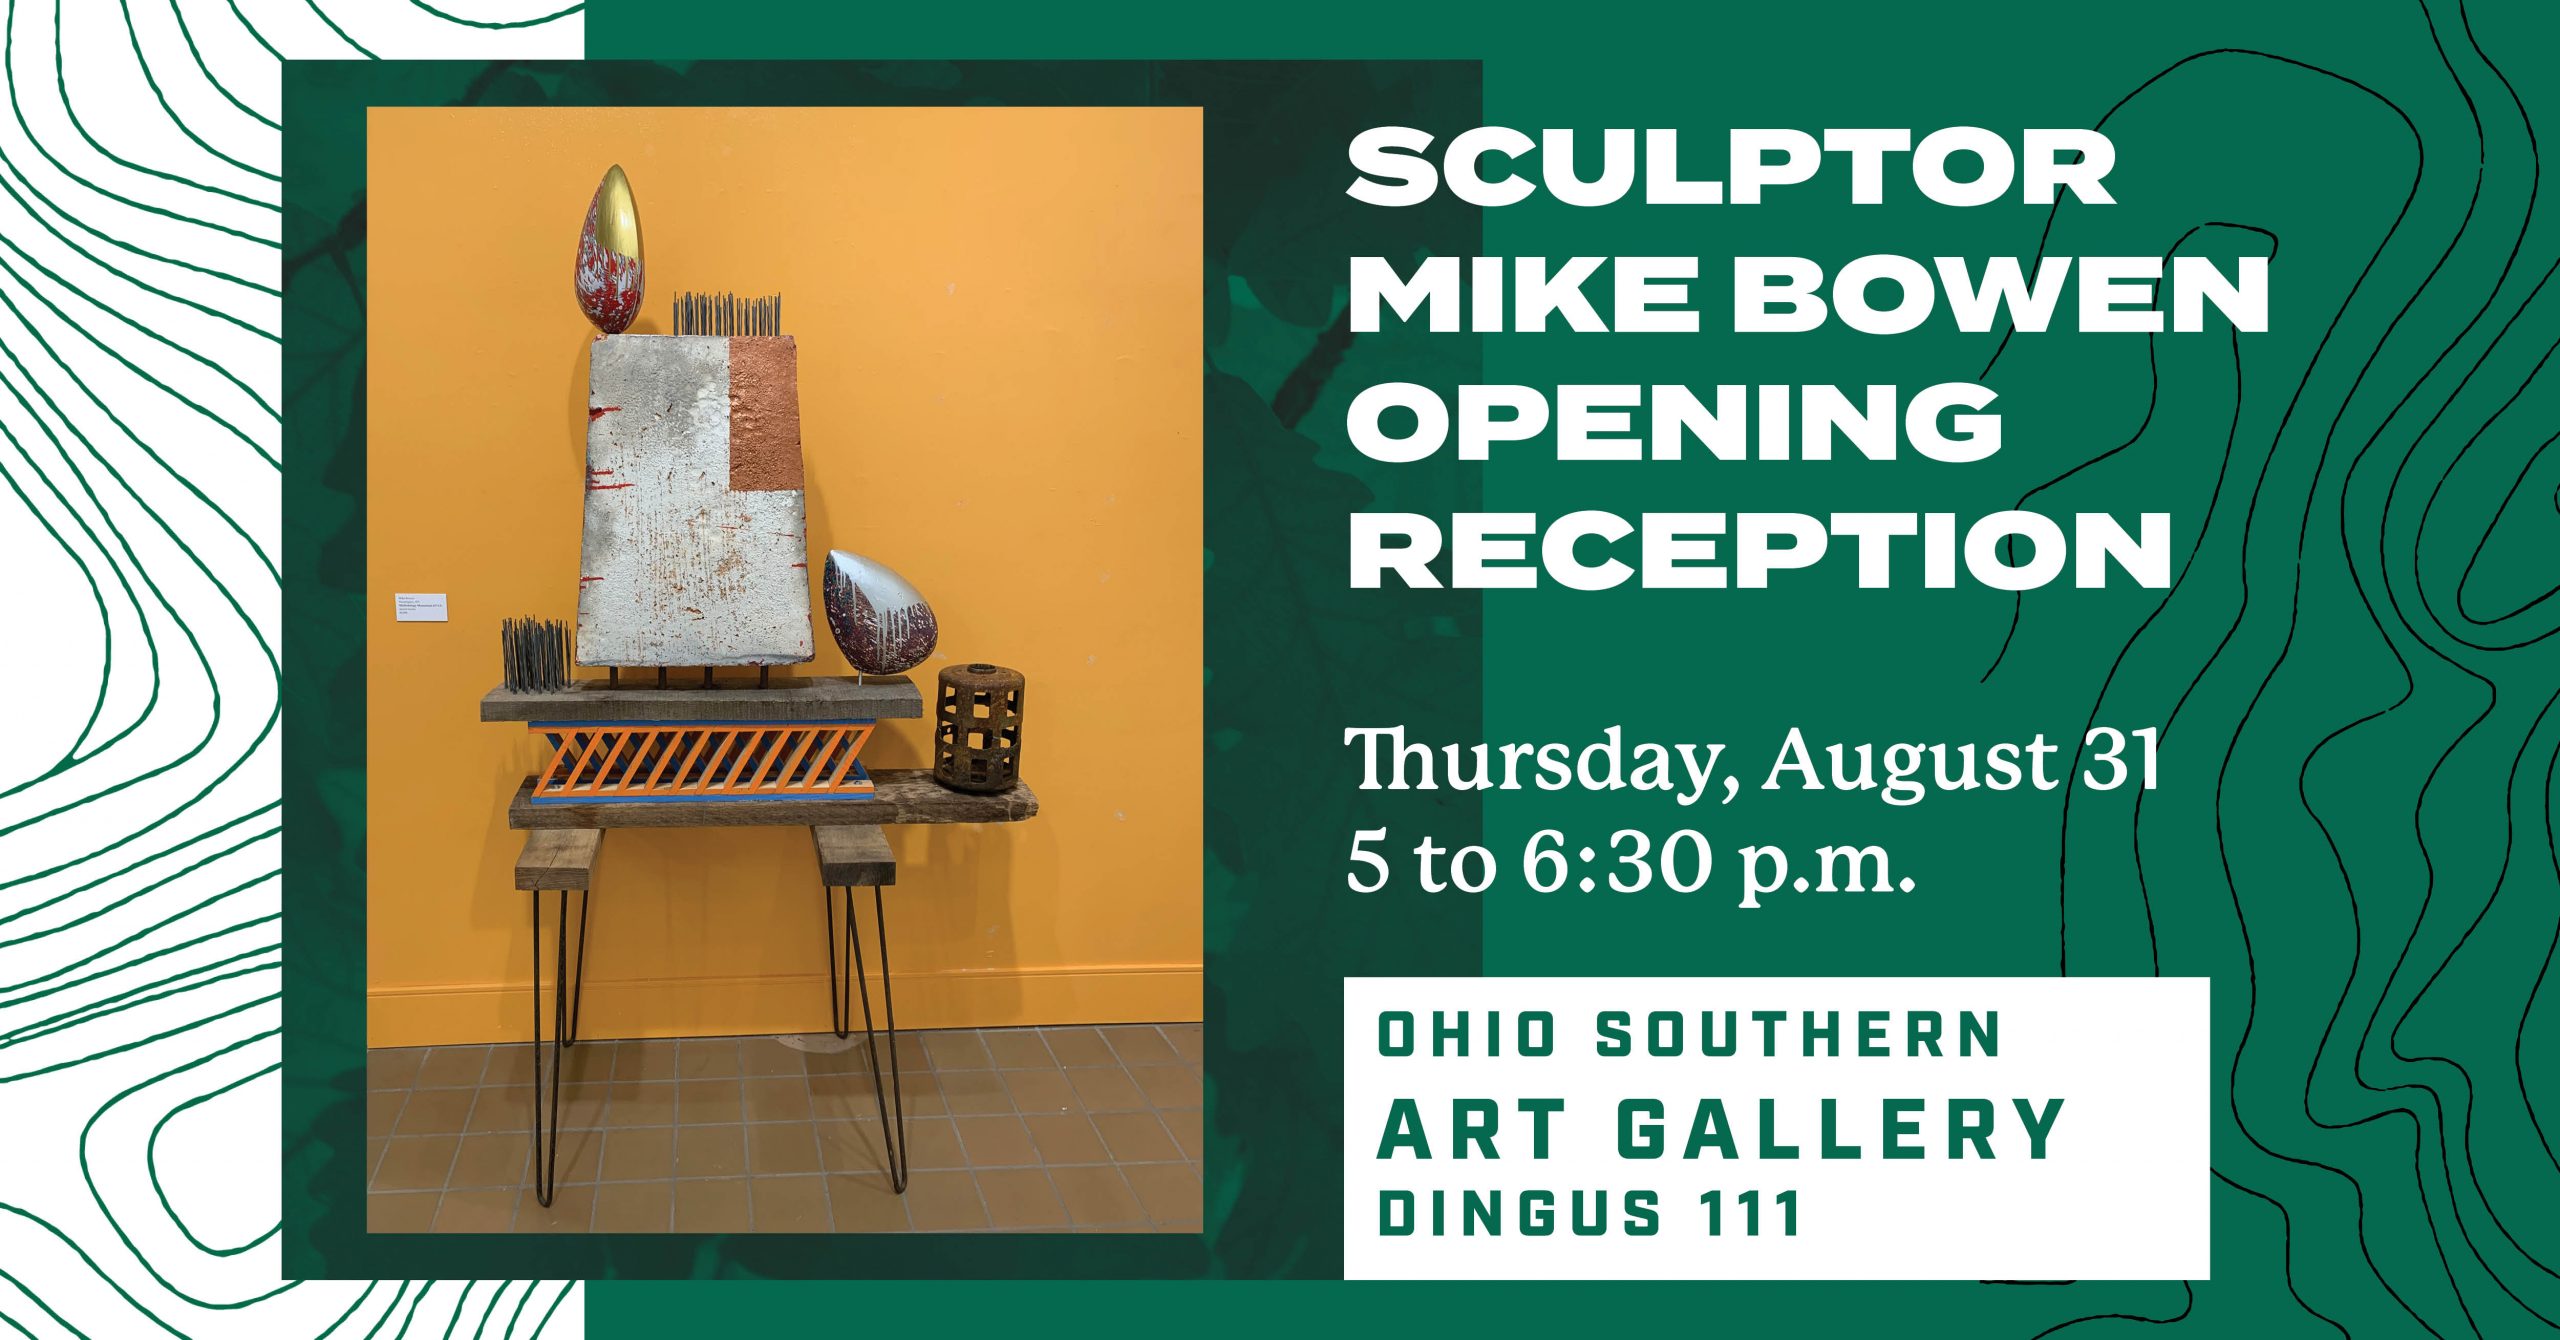 An image advertising the opening of sculptor Mike Bowen's exhibition. The image is green and in a "postcard shape," with an image of one of the artists' works next to information about the event.